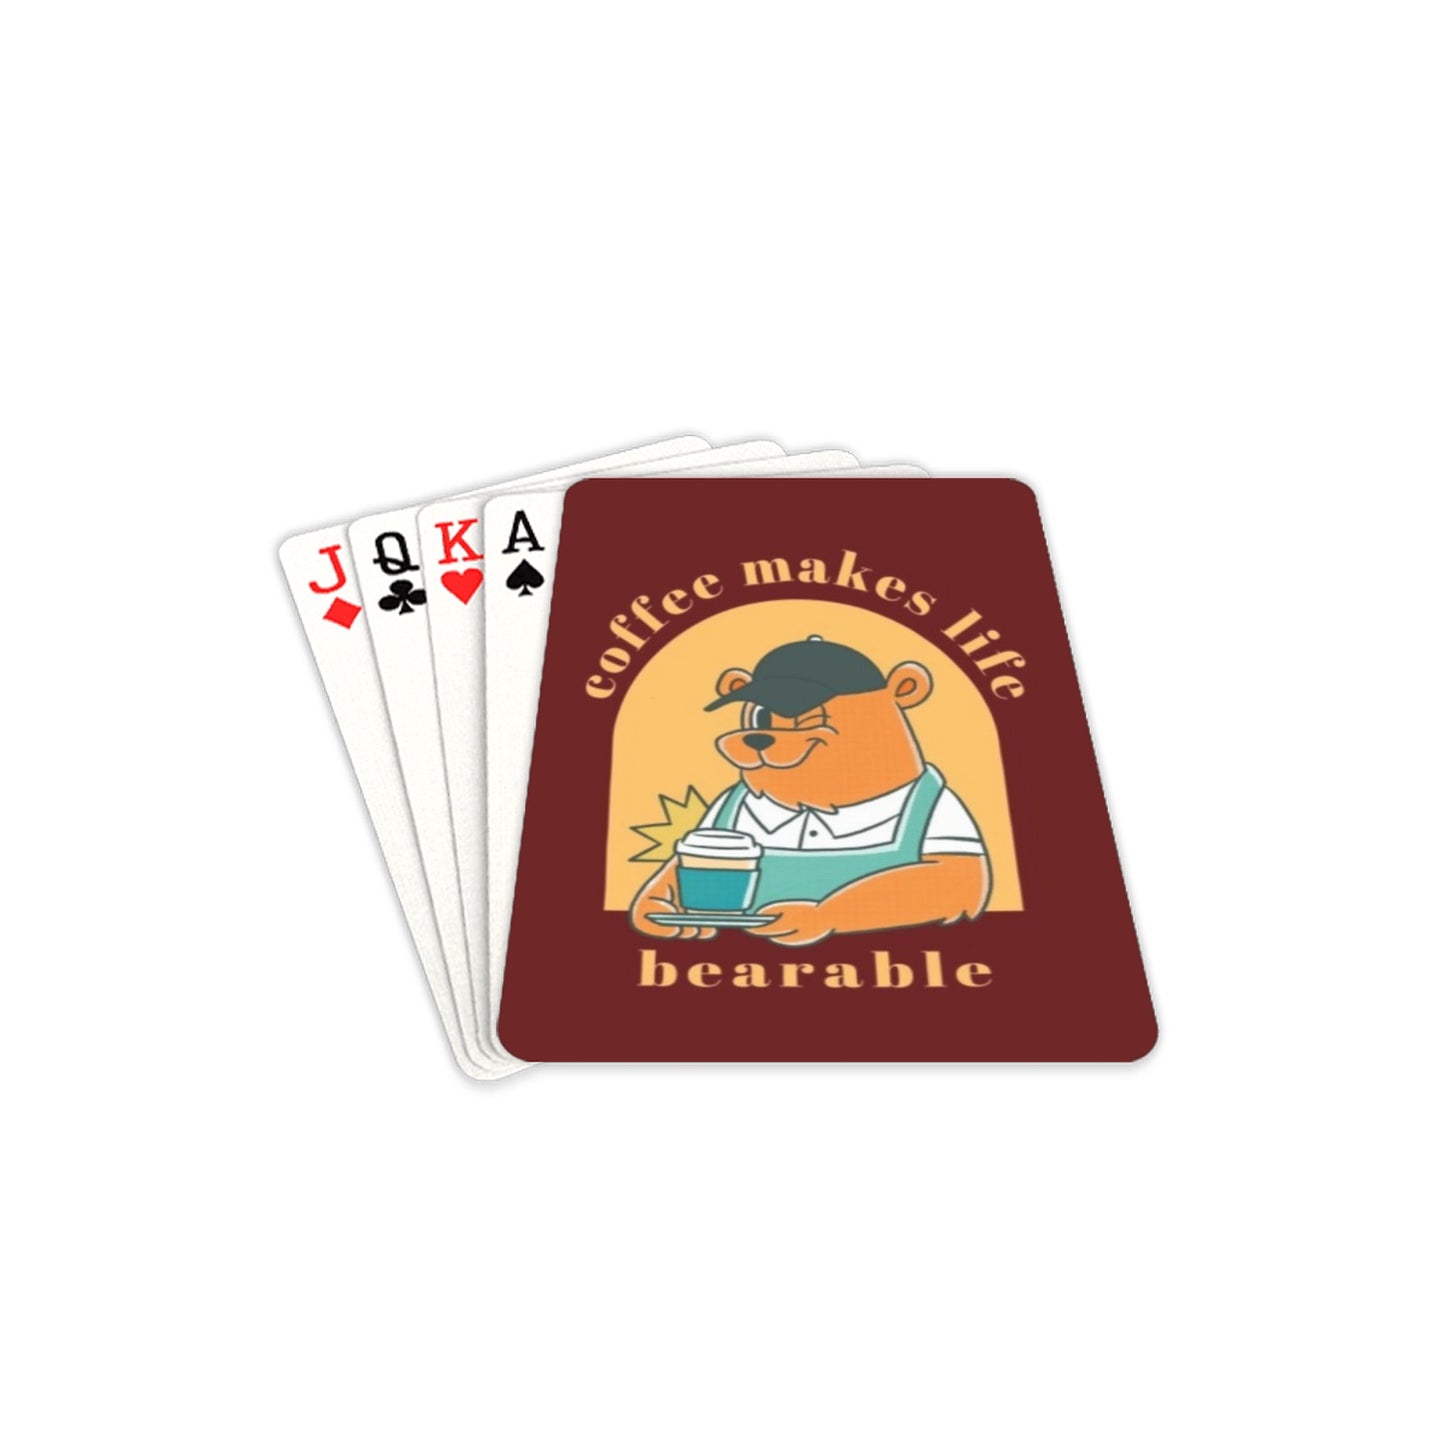 Coffee Makes Life Bearable - Playing Cards 2.5"x3.5" Playing Card 2.5"x3.5"